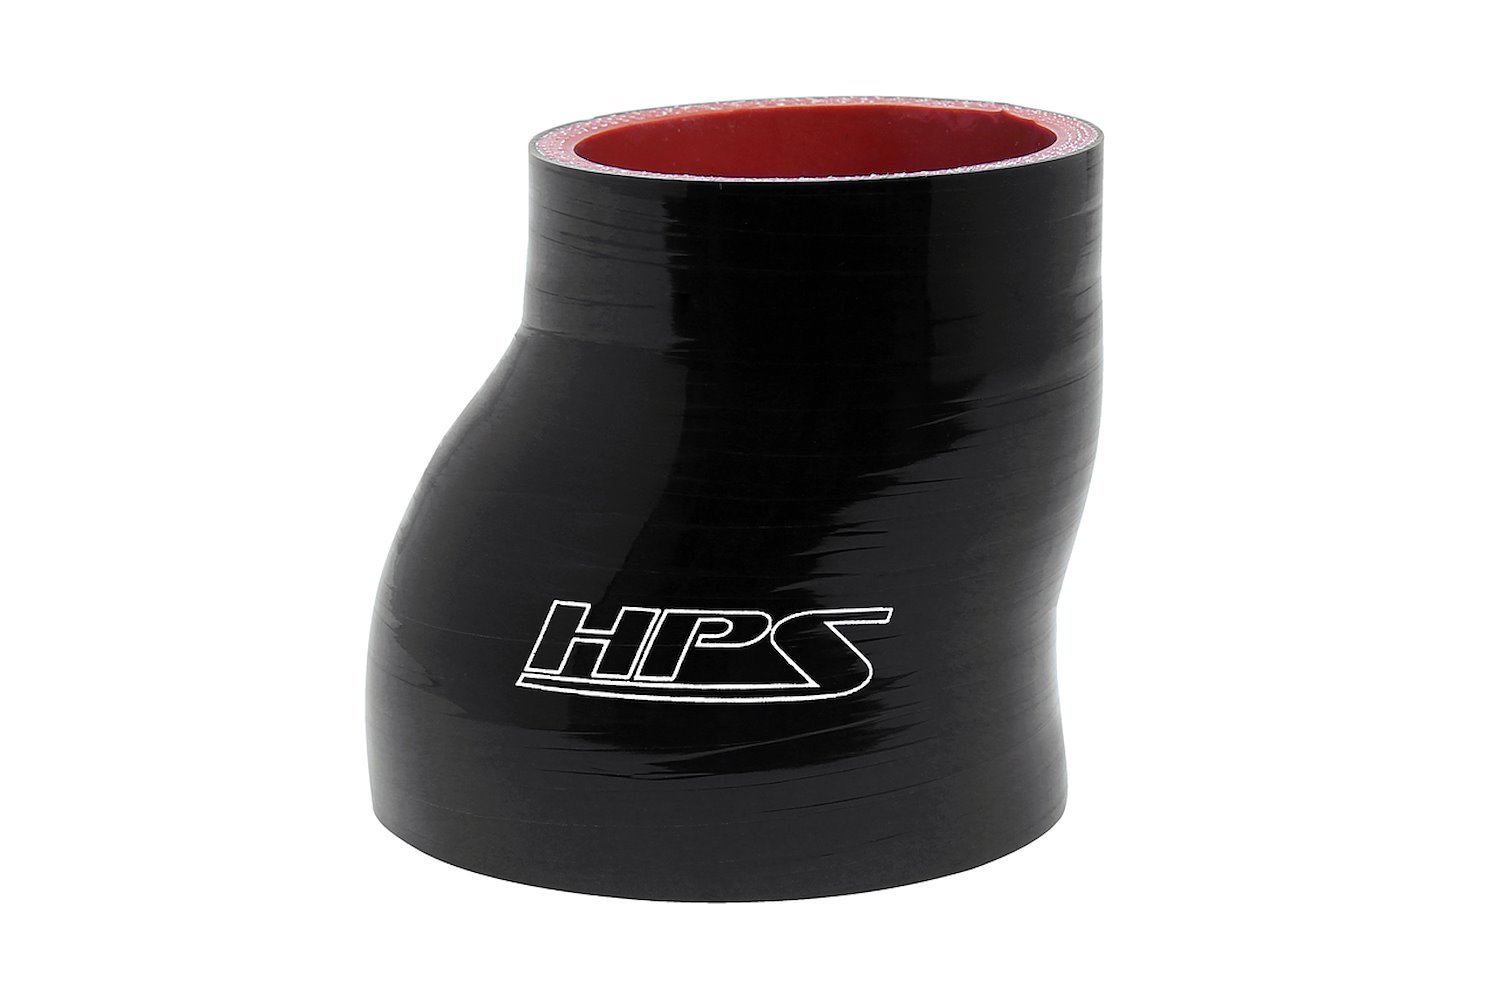 HTSOR-200-238-BLK Offset Reducer, High-Temp 4-Ply Reinforced, 2 in. ID To 2 3/8 in. ID, 3 in. Length.